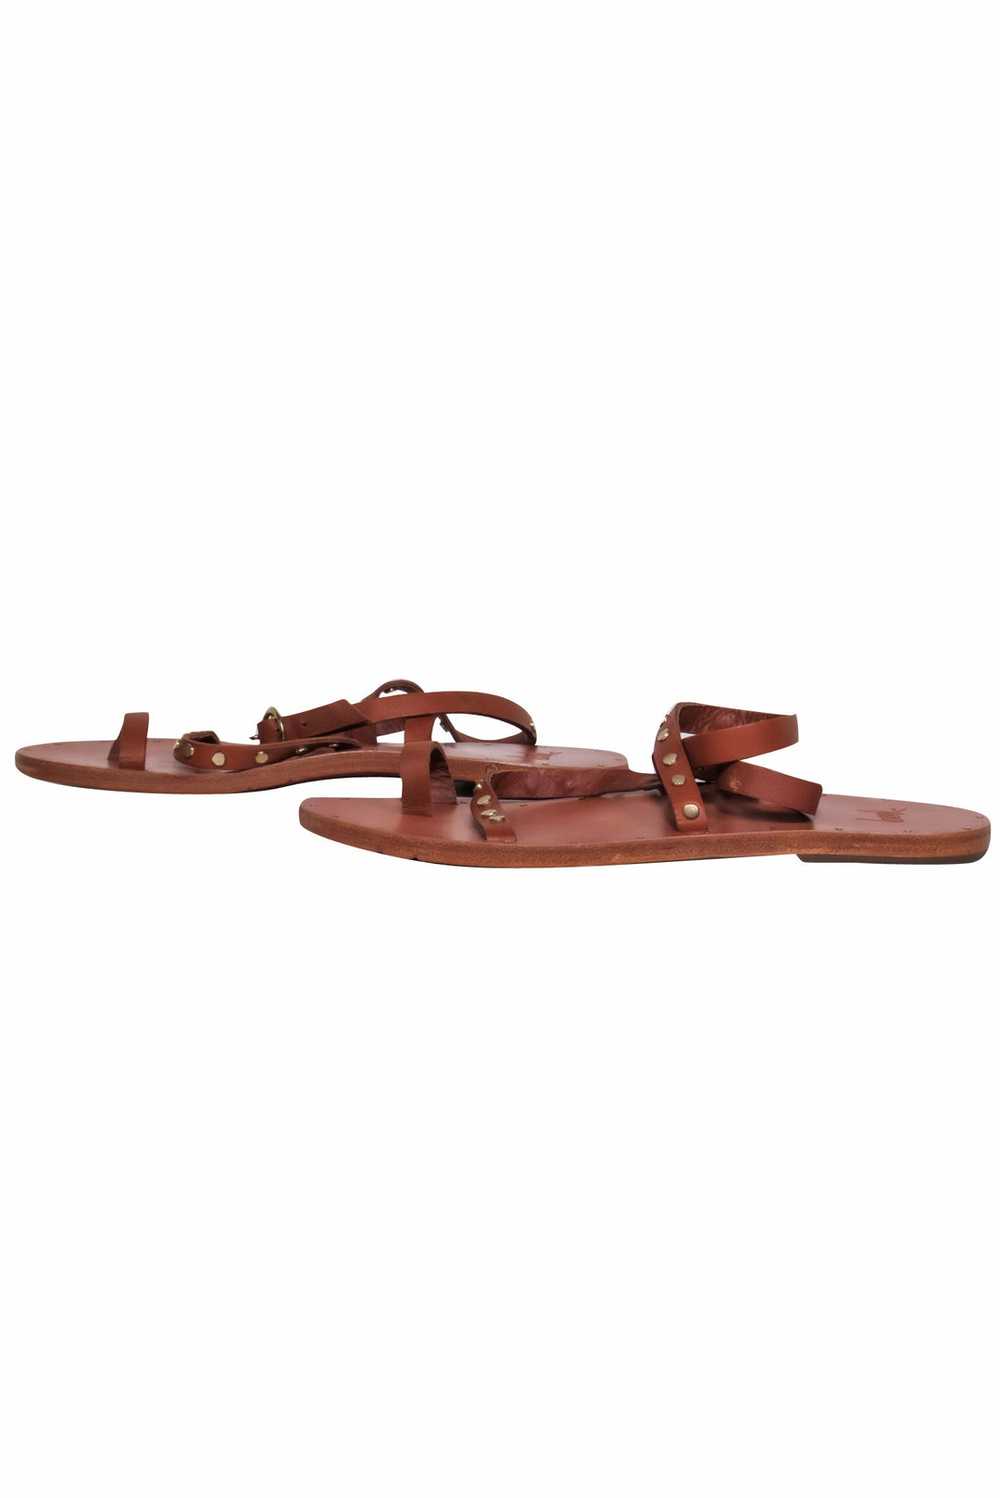 Beek - Brown Strappy Wrap Sandals 9 - image 3